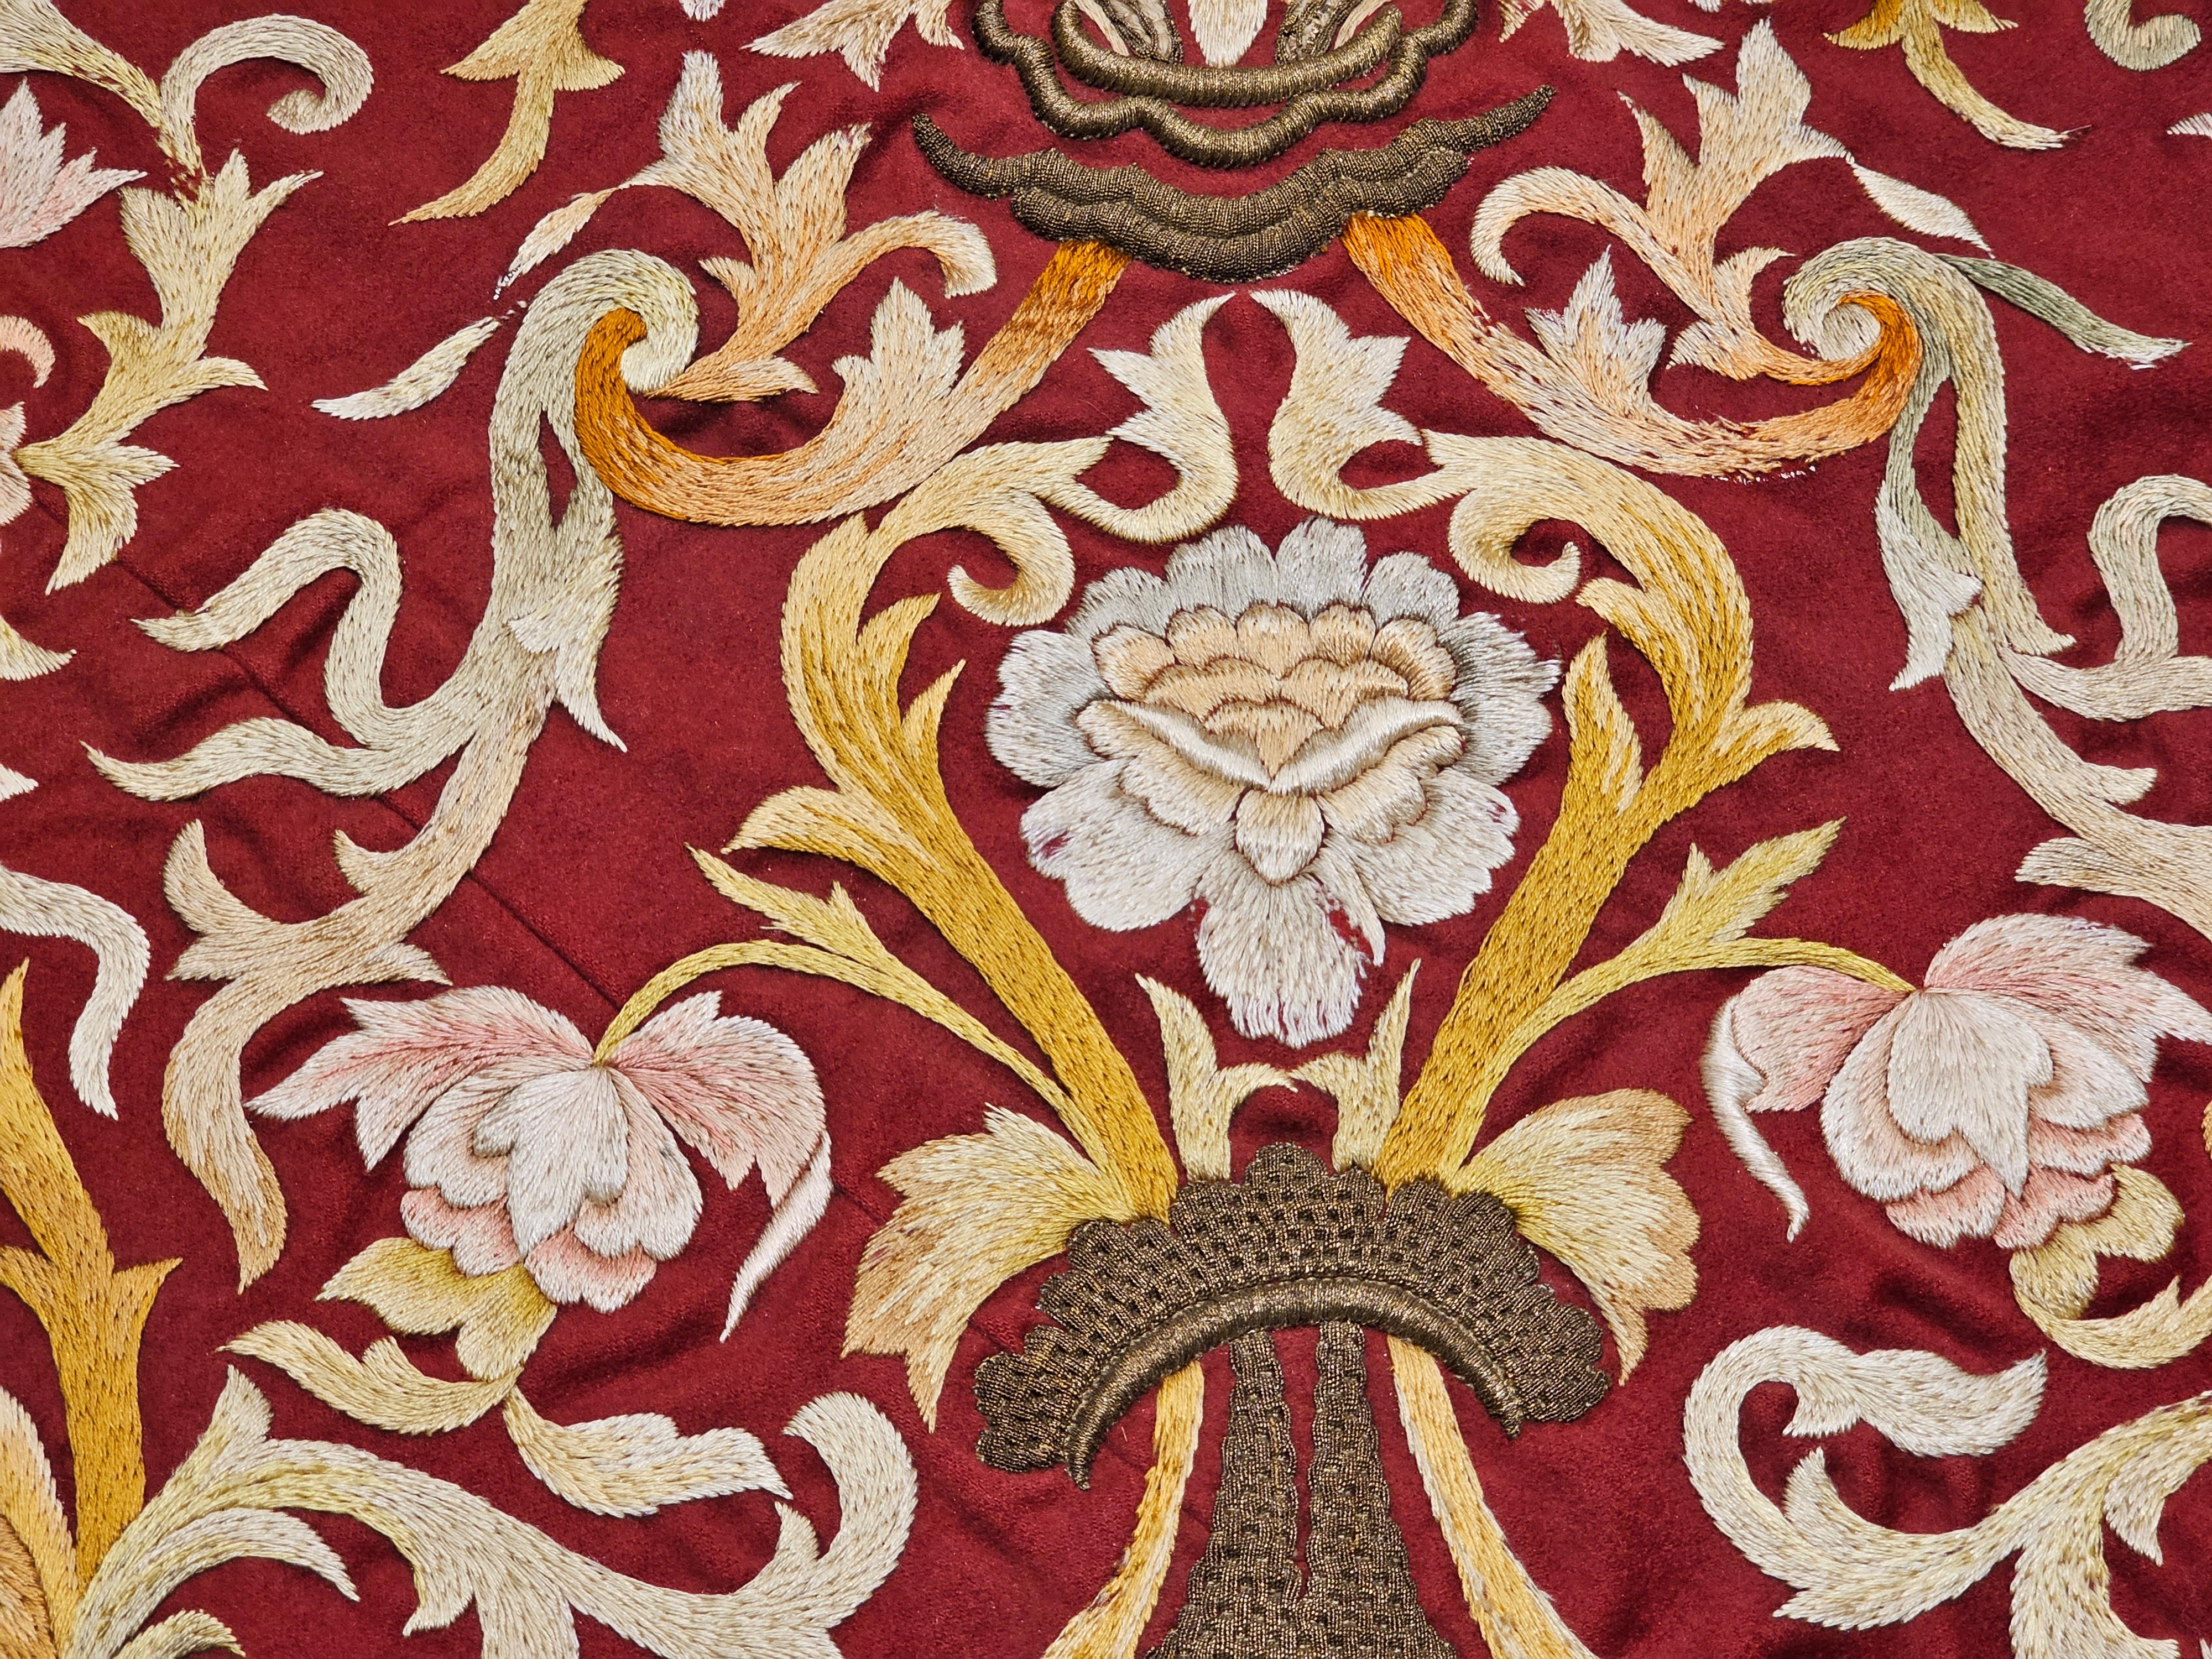 19th Century Ottoman Hand Embroidered Silk and Gilt Threads Tapestry Textile In Good Condition For Sale In Barrington, IL